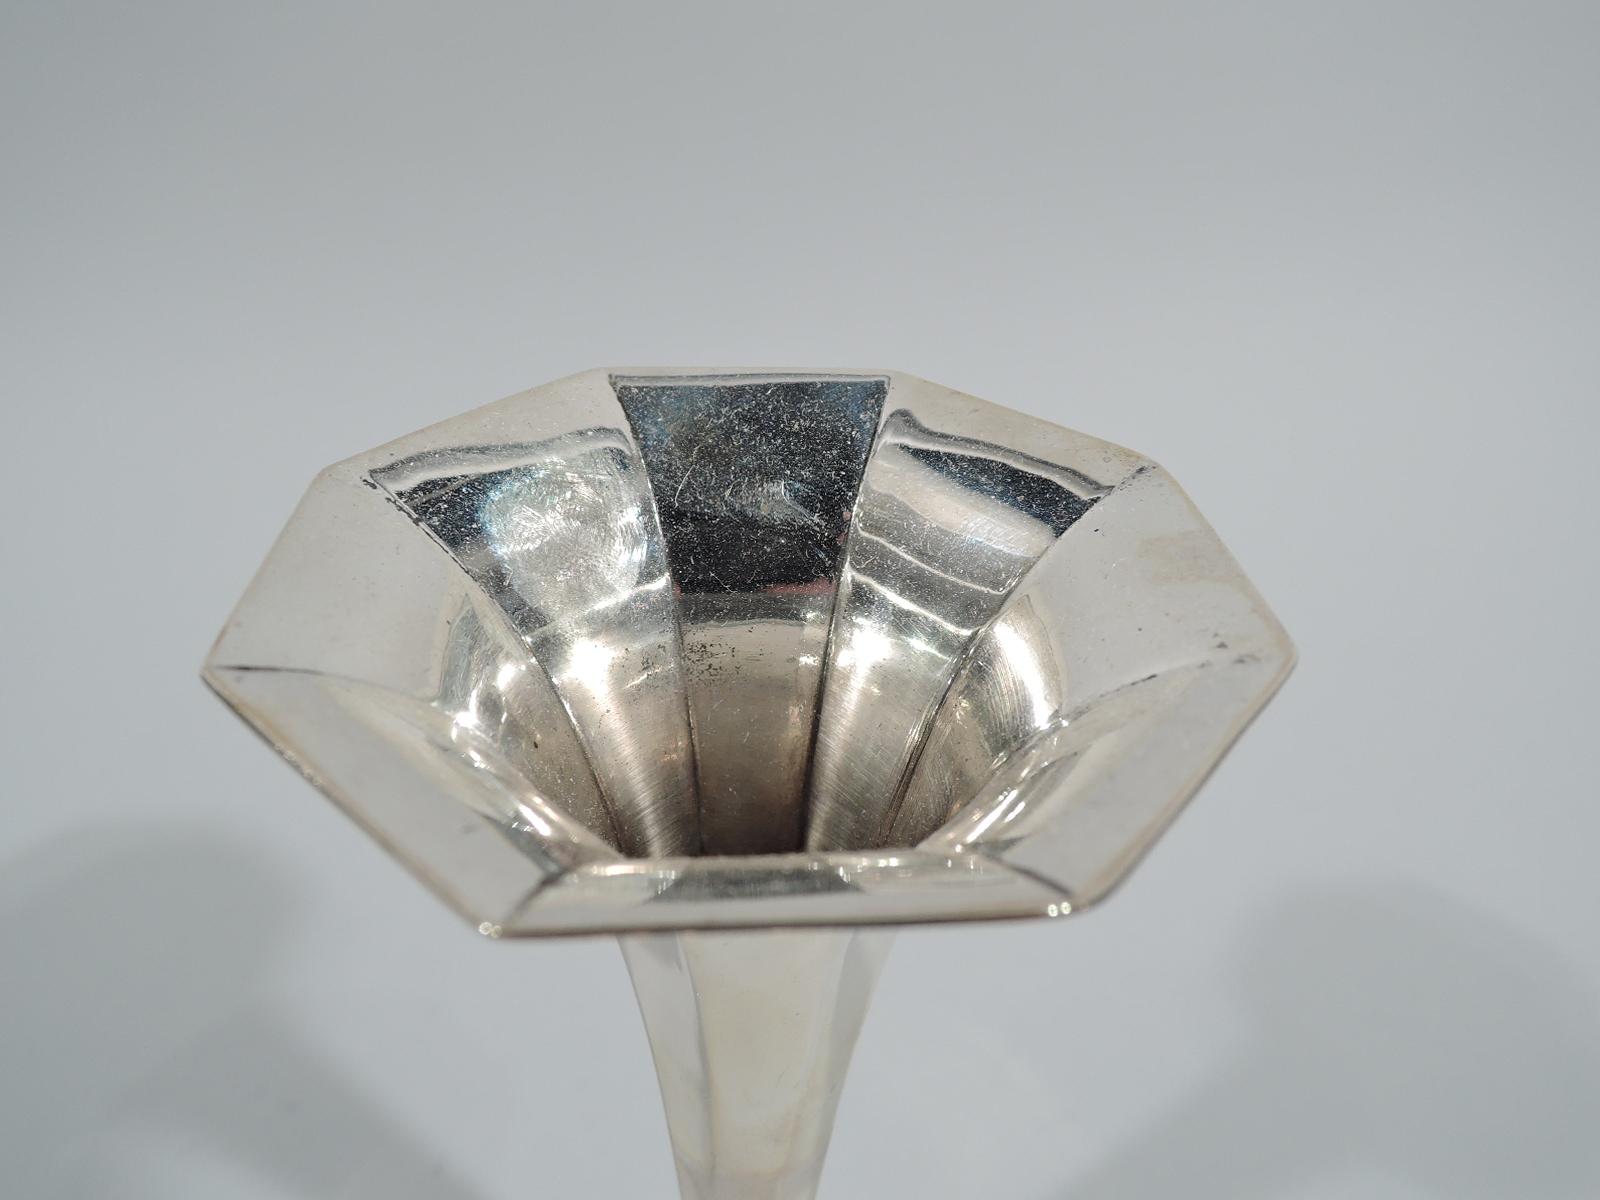 Art Deco sterling silver bud vase. Made by Tiffany & Co. in New York, circa 1912. Faceted cone with flared and molded octagonal mouth. Foot stepped and octagonal. Small-scale modernism for one simple blossom. Fully marked including pattern no. 18375